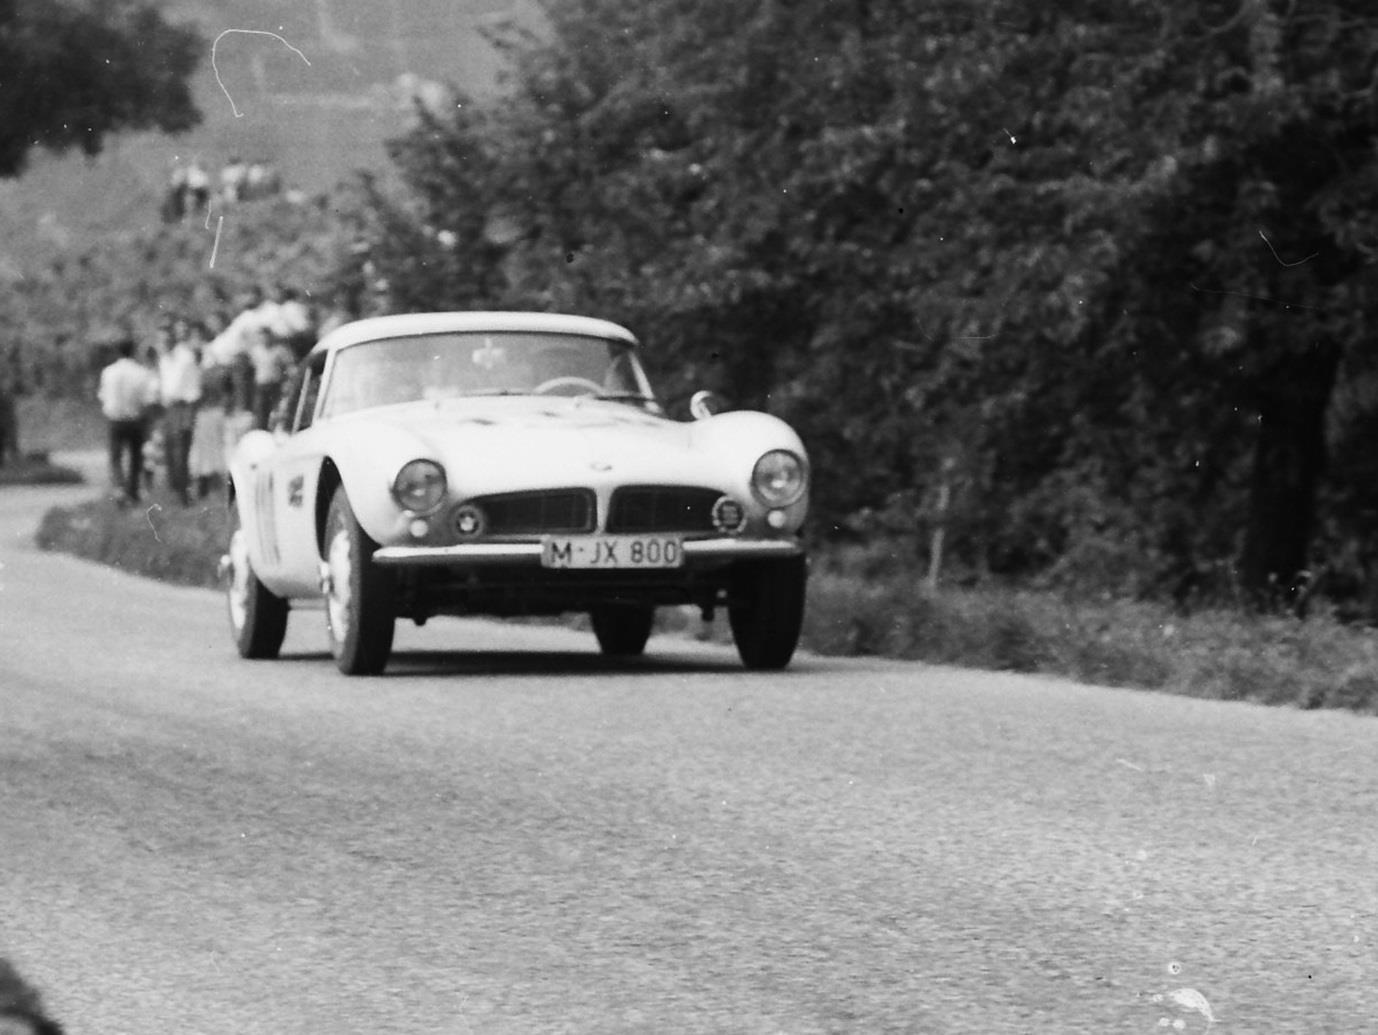 At the age of 57 he raced this factory BMW 507 at the European Hill Championship in 1958 at Ollon Villars